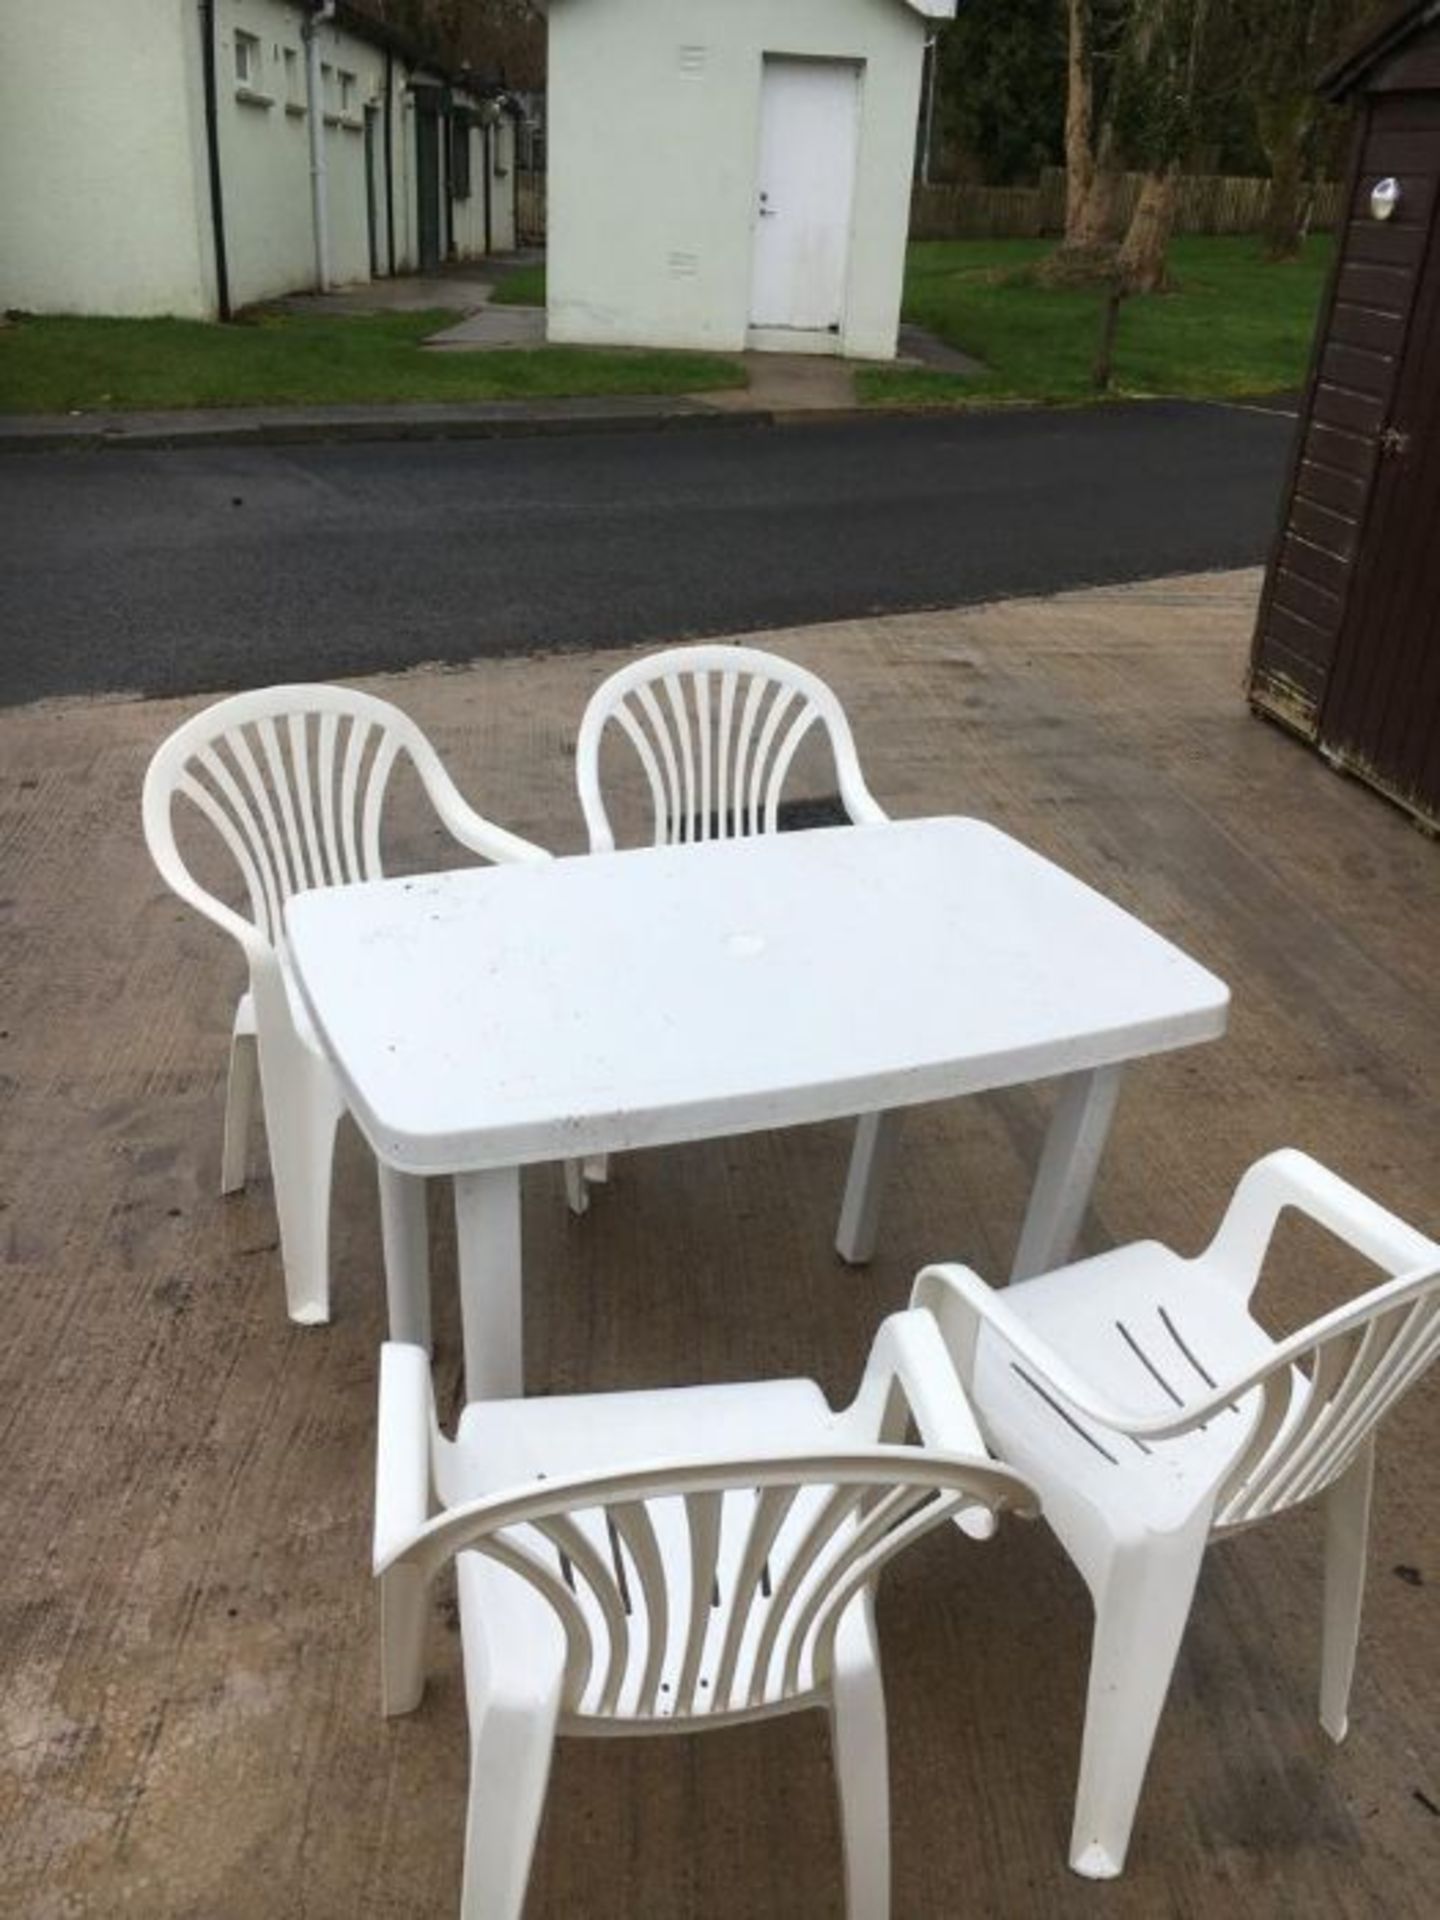 5 PIECE TABLE AND CHAIRS PATIO SET - LOCATED AT CASTLE ARCHDALE CARAVAN PARK - (NO HAMMER VAT) **